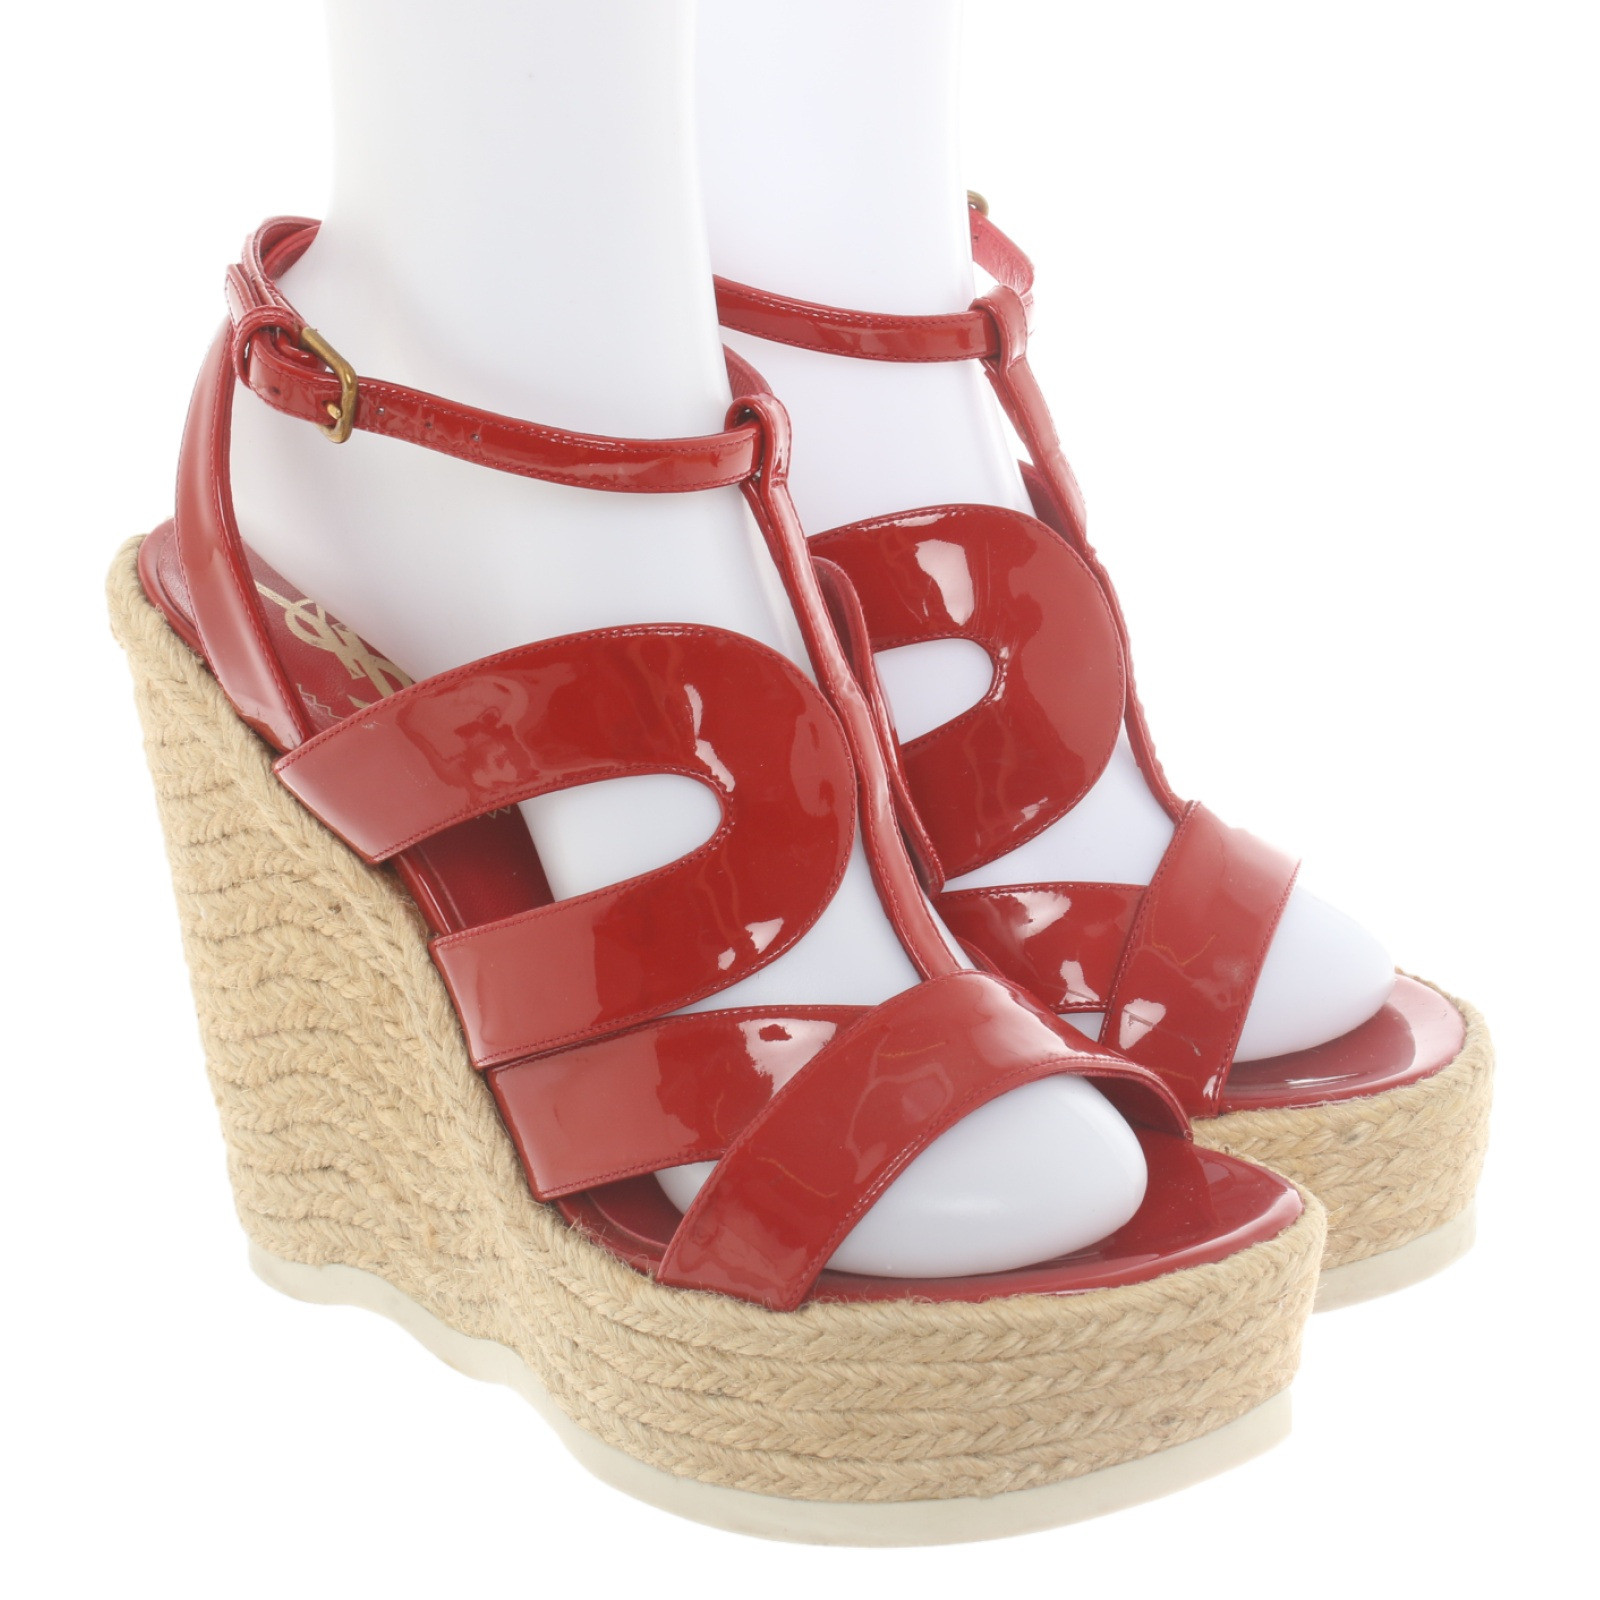 Yves Saint Laurent Wedges Patent leather in Red - Second Hand Yves Saint  Laurent Wedges Patent leather in Red buy used for 119€ (7154169)